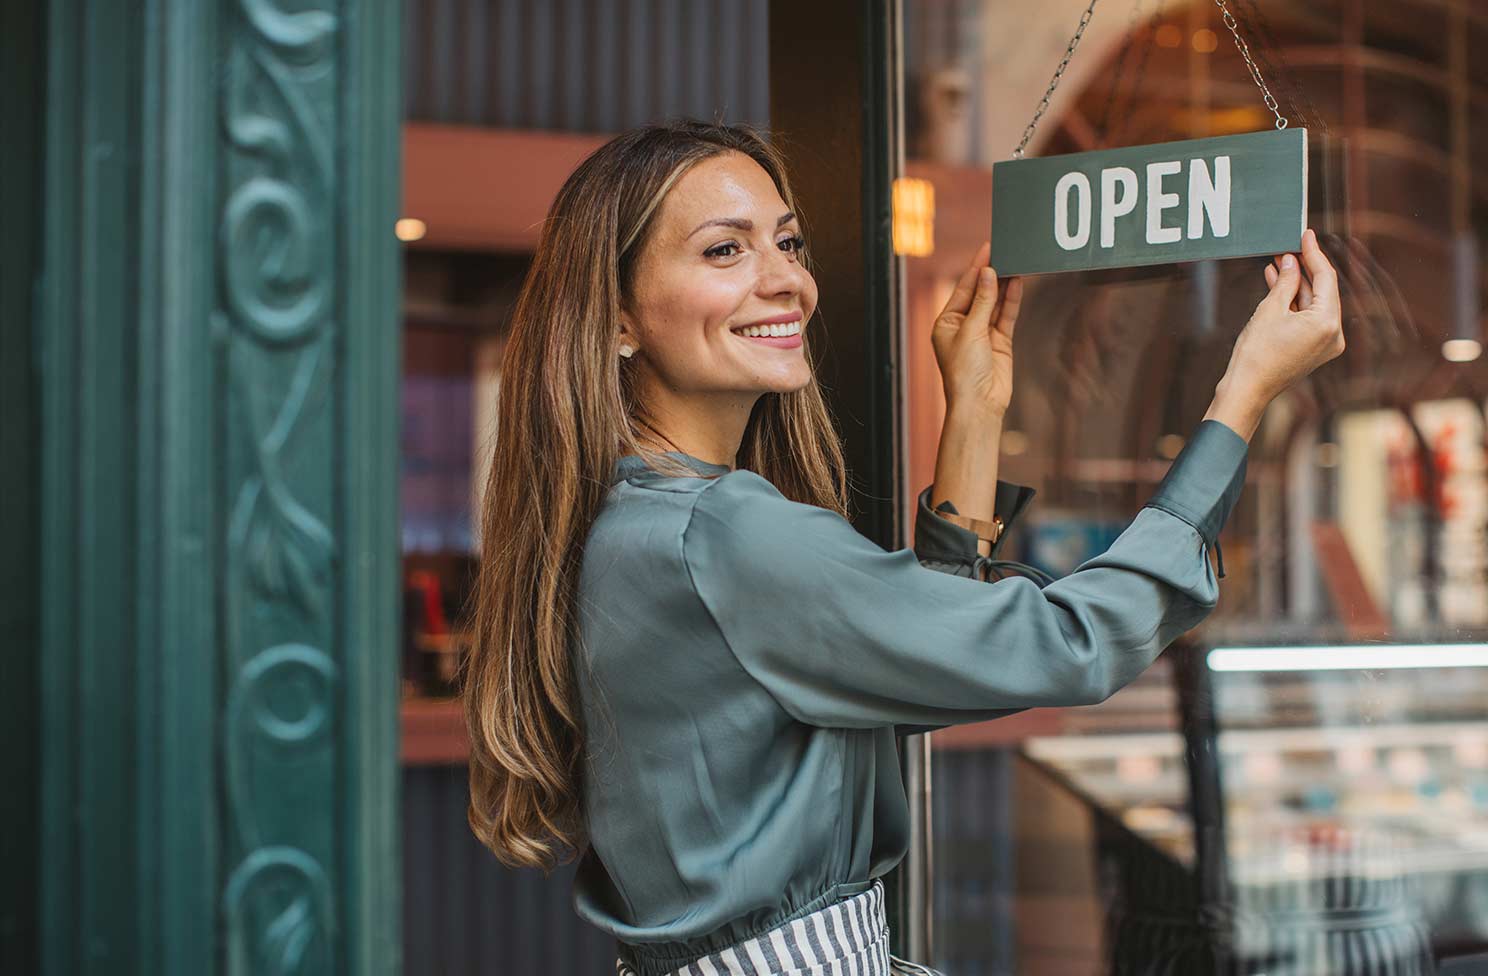 Smiling woman turning shop sign to Open